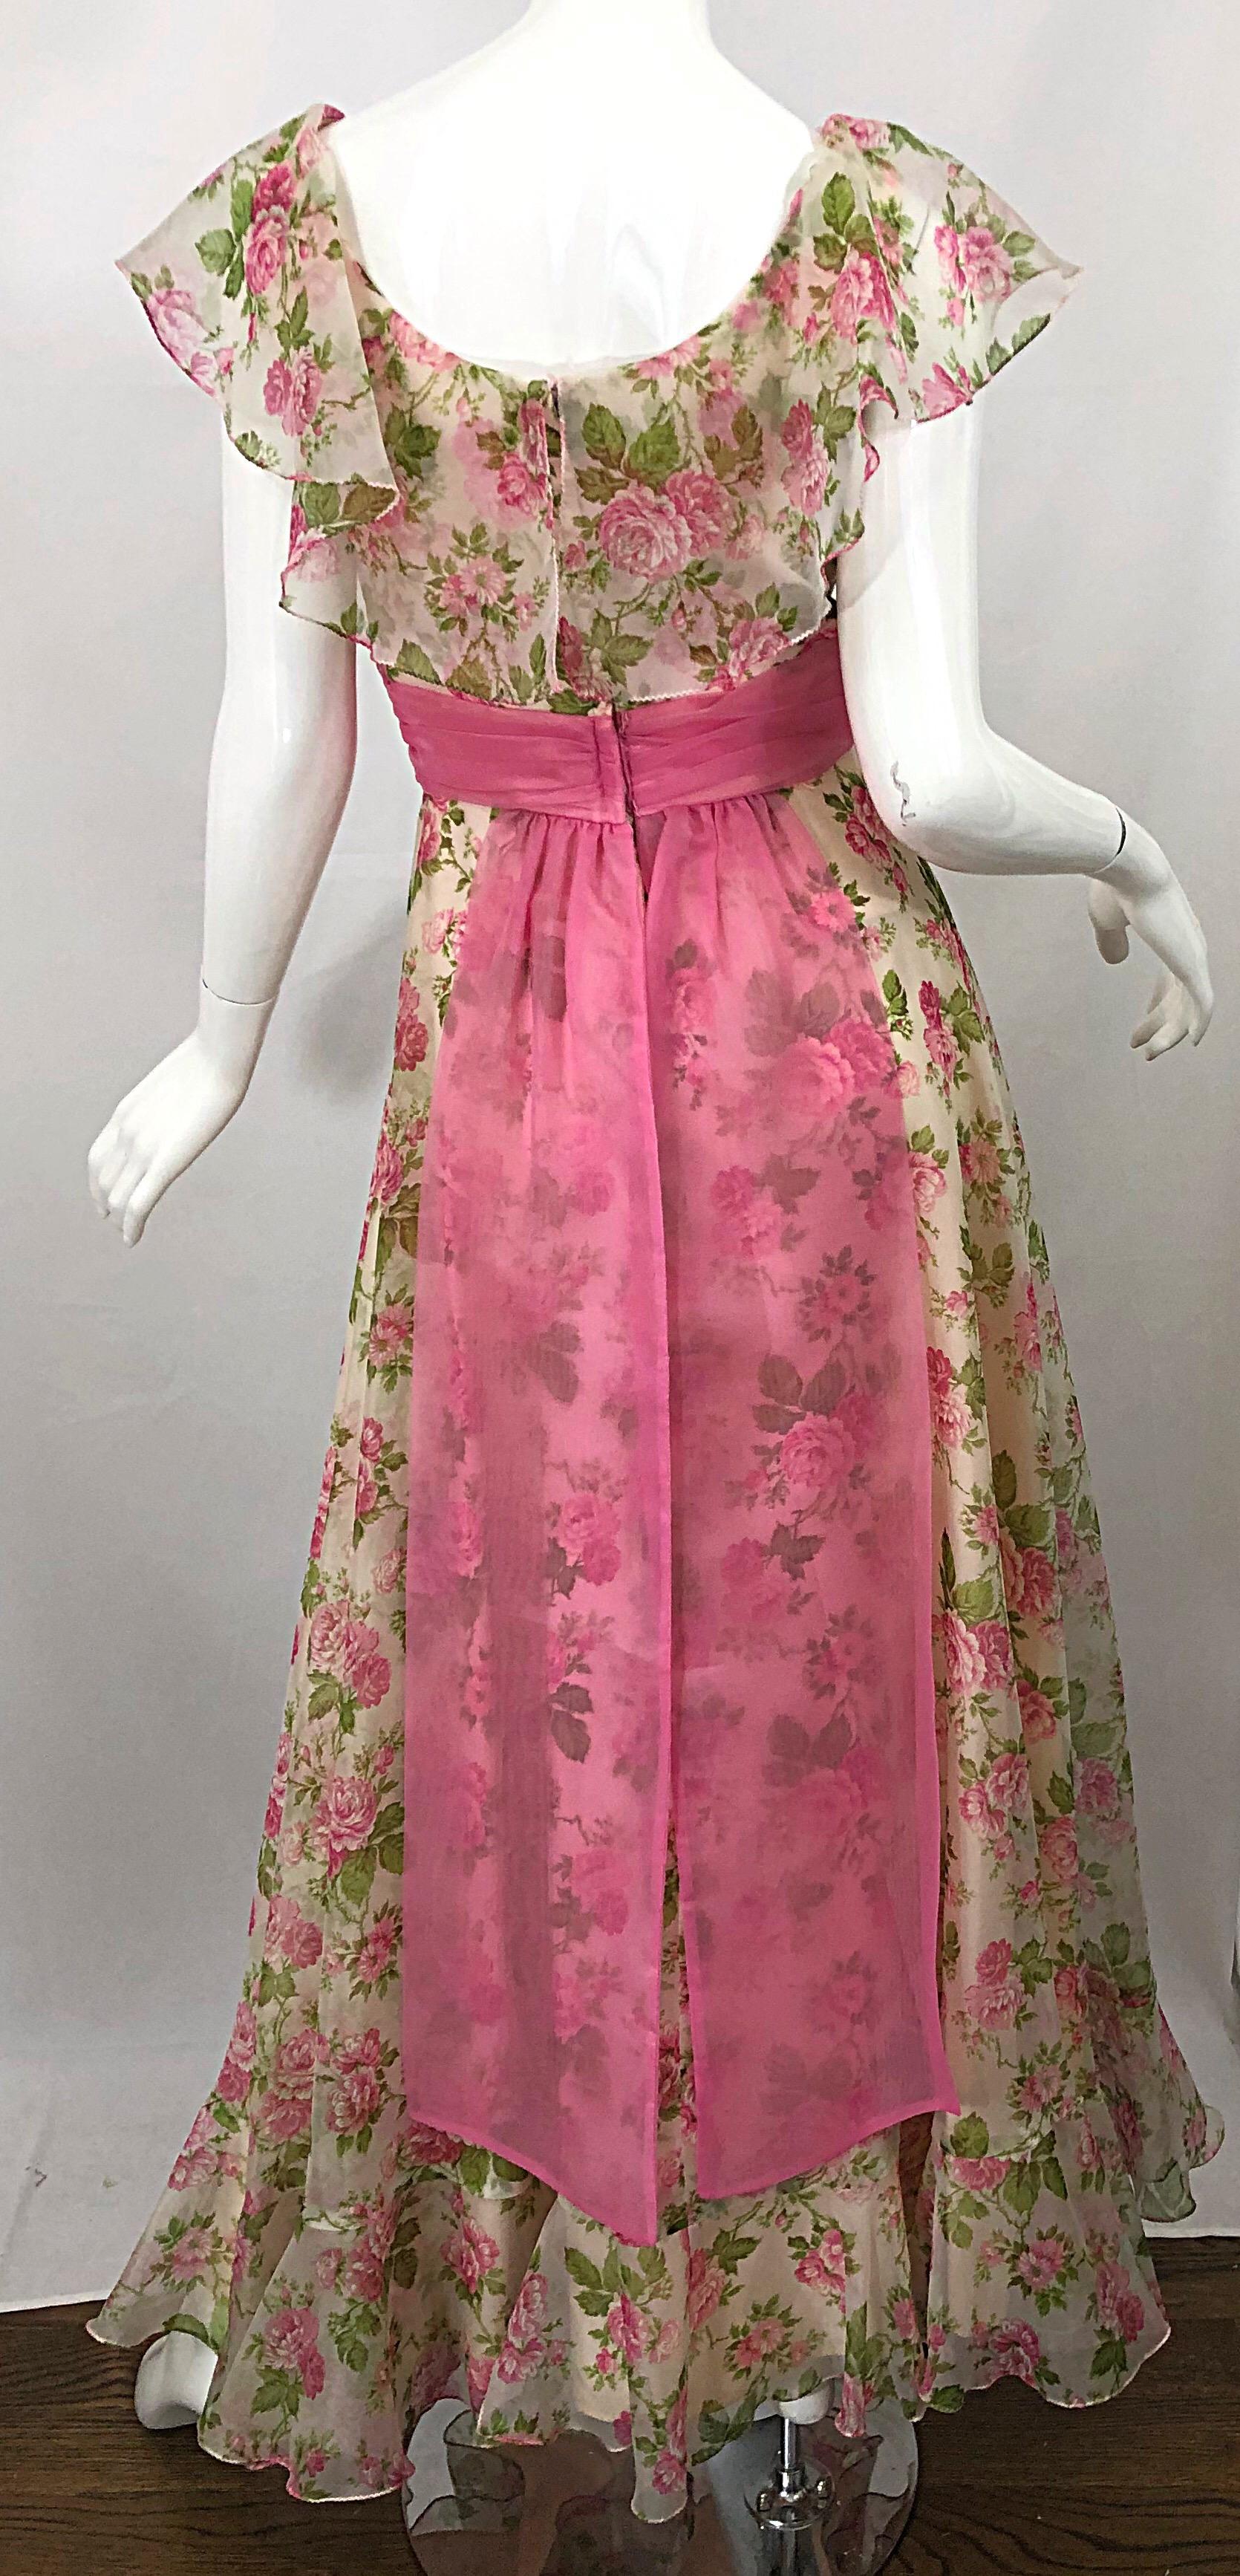 Sylvia Ann 1970s Rose Print Pink Ivory Chiffon Vintage 70s Maxi Dress Gown For Sale 2